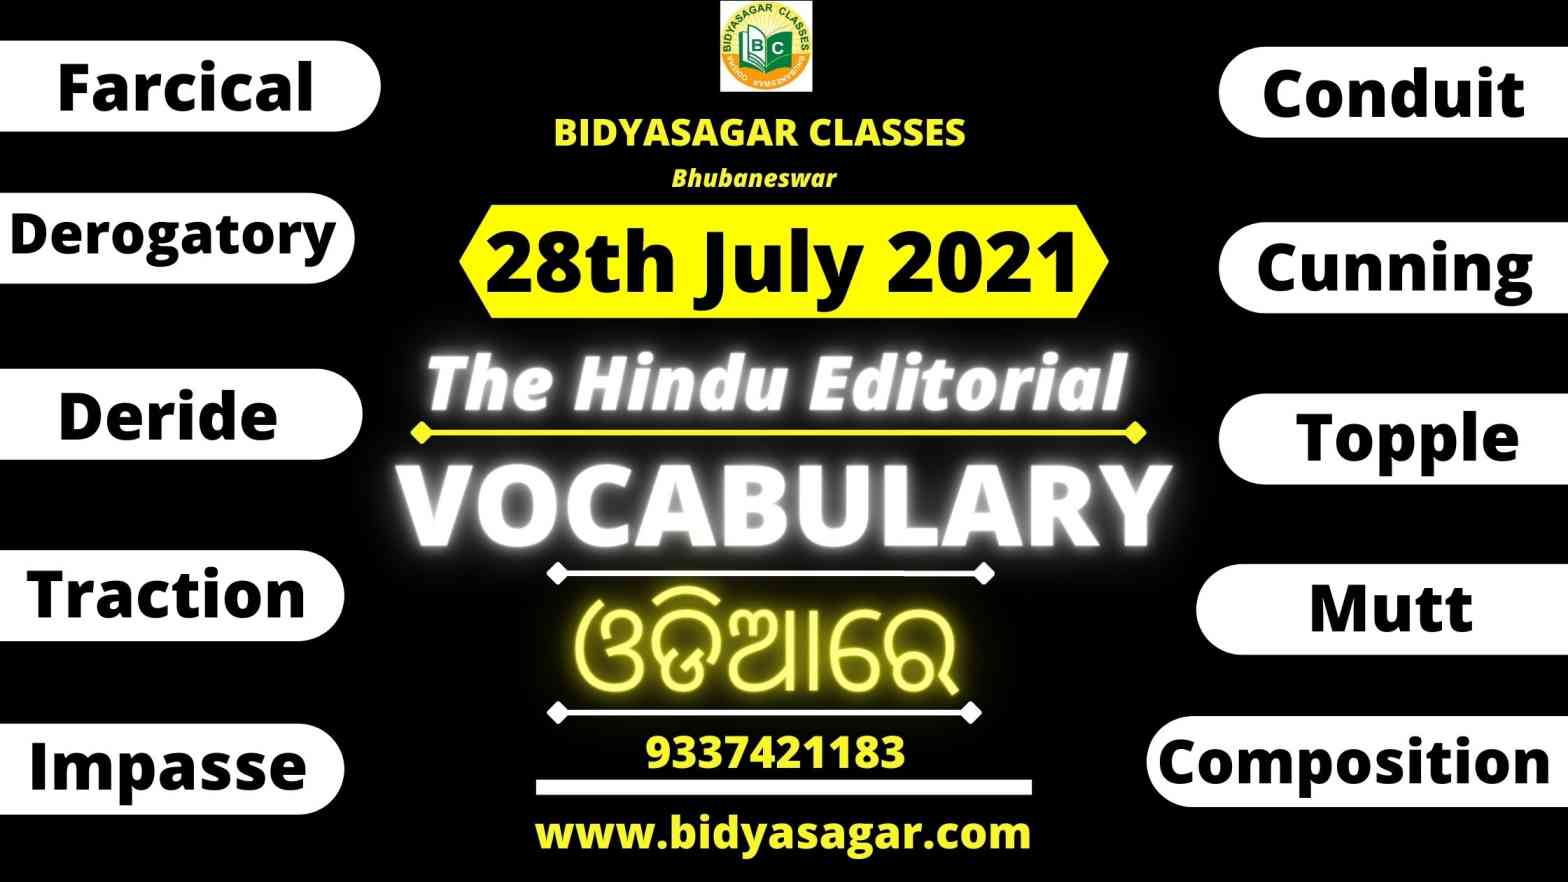 The Hindu Editorial Vocabulary of 28th July 2021